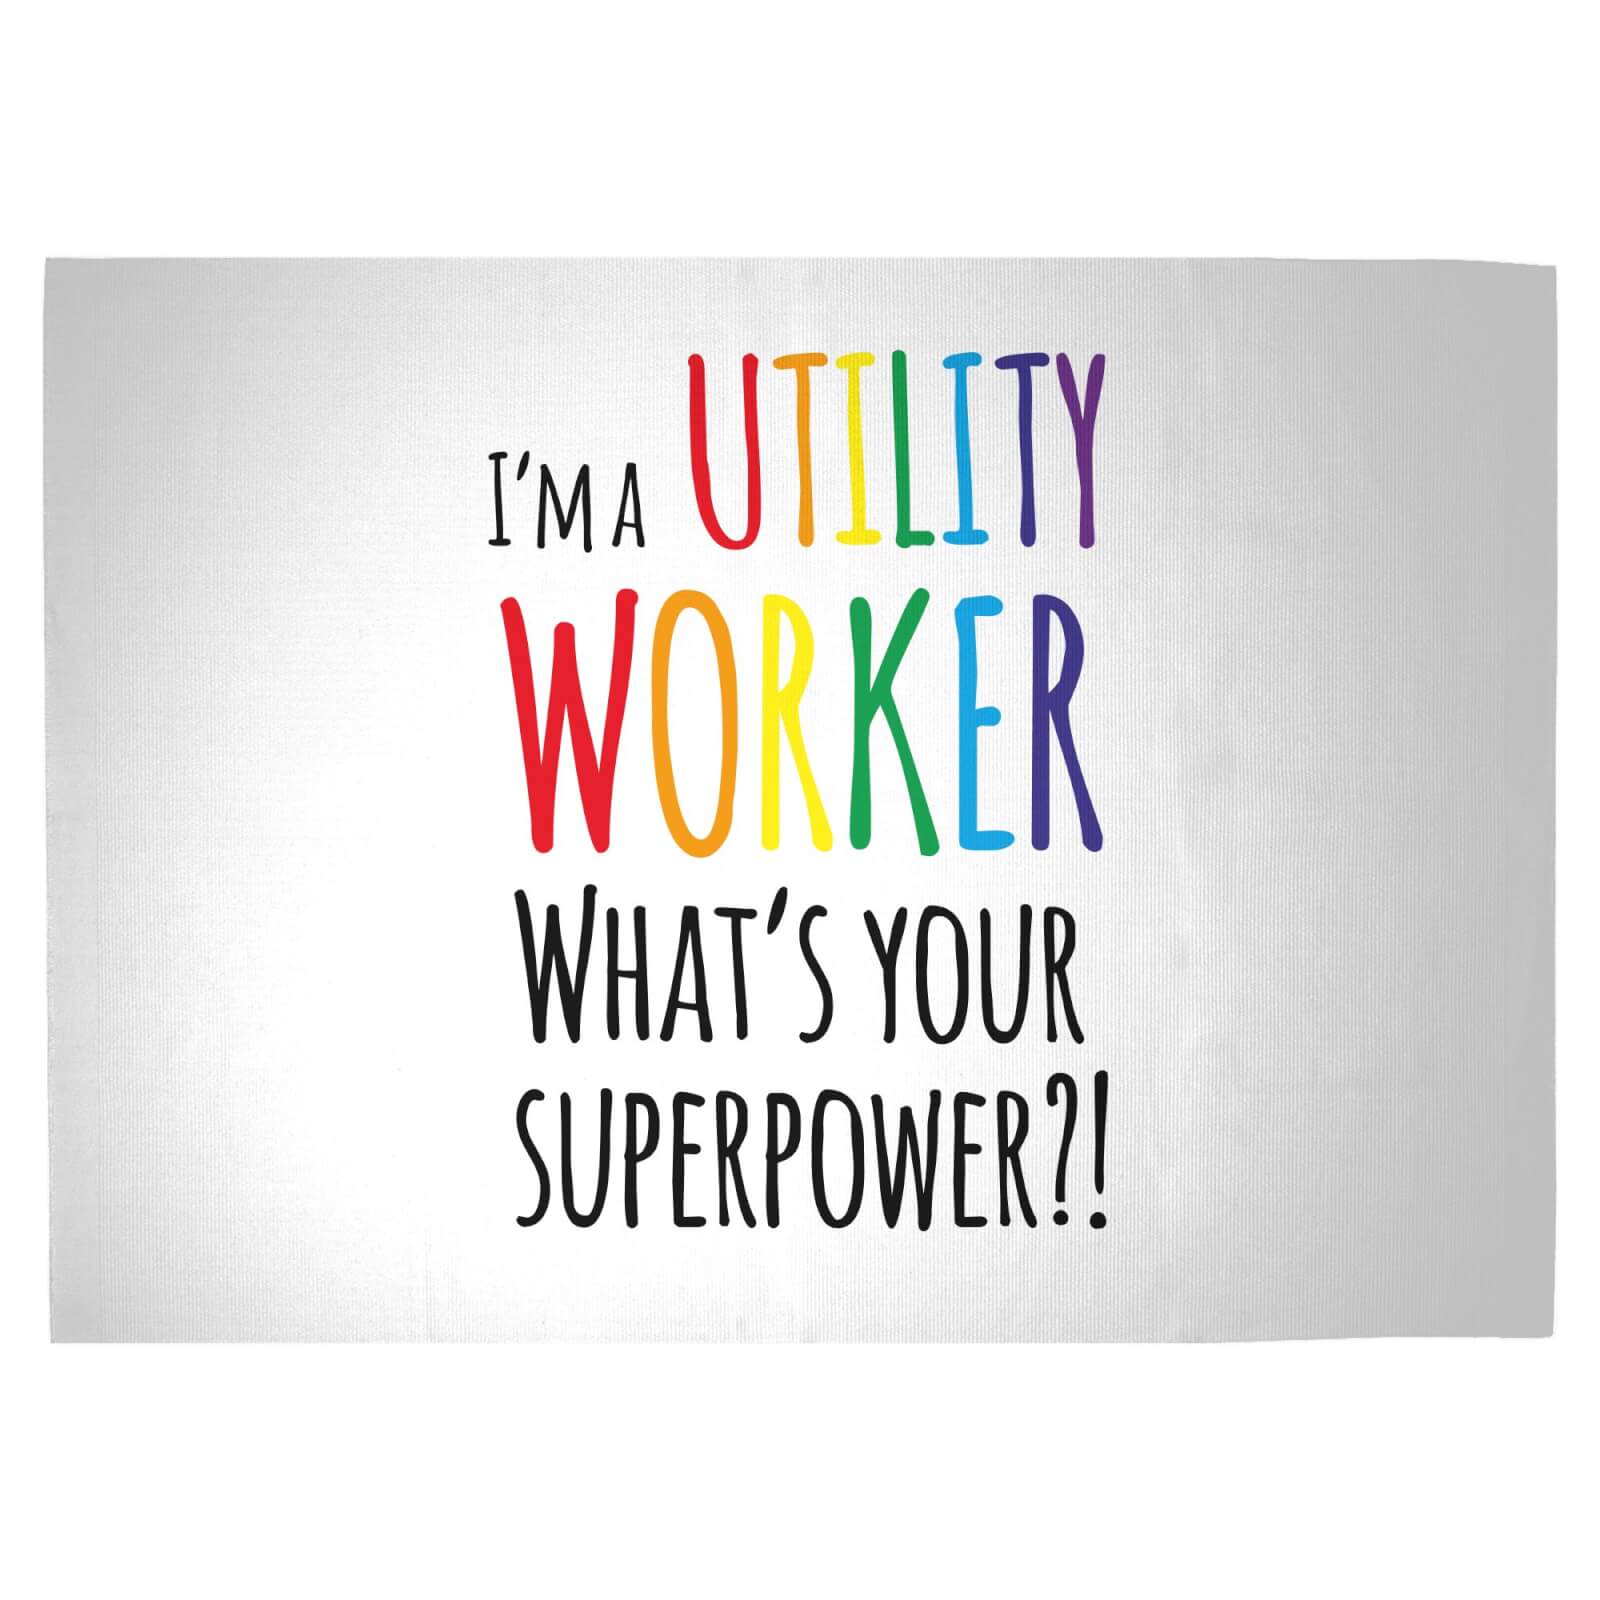 I'm A Utility Worker What's Your Super Power Woven Rug - Large